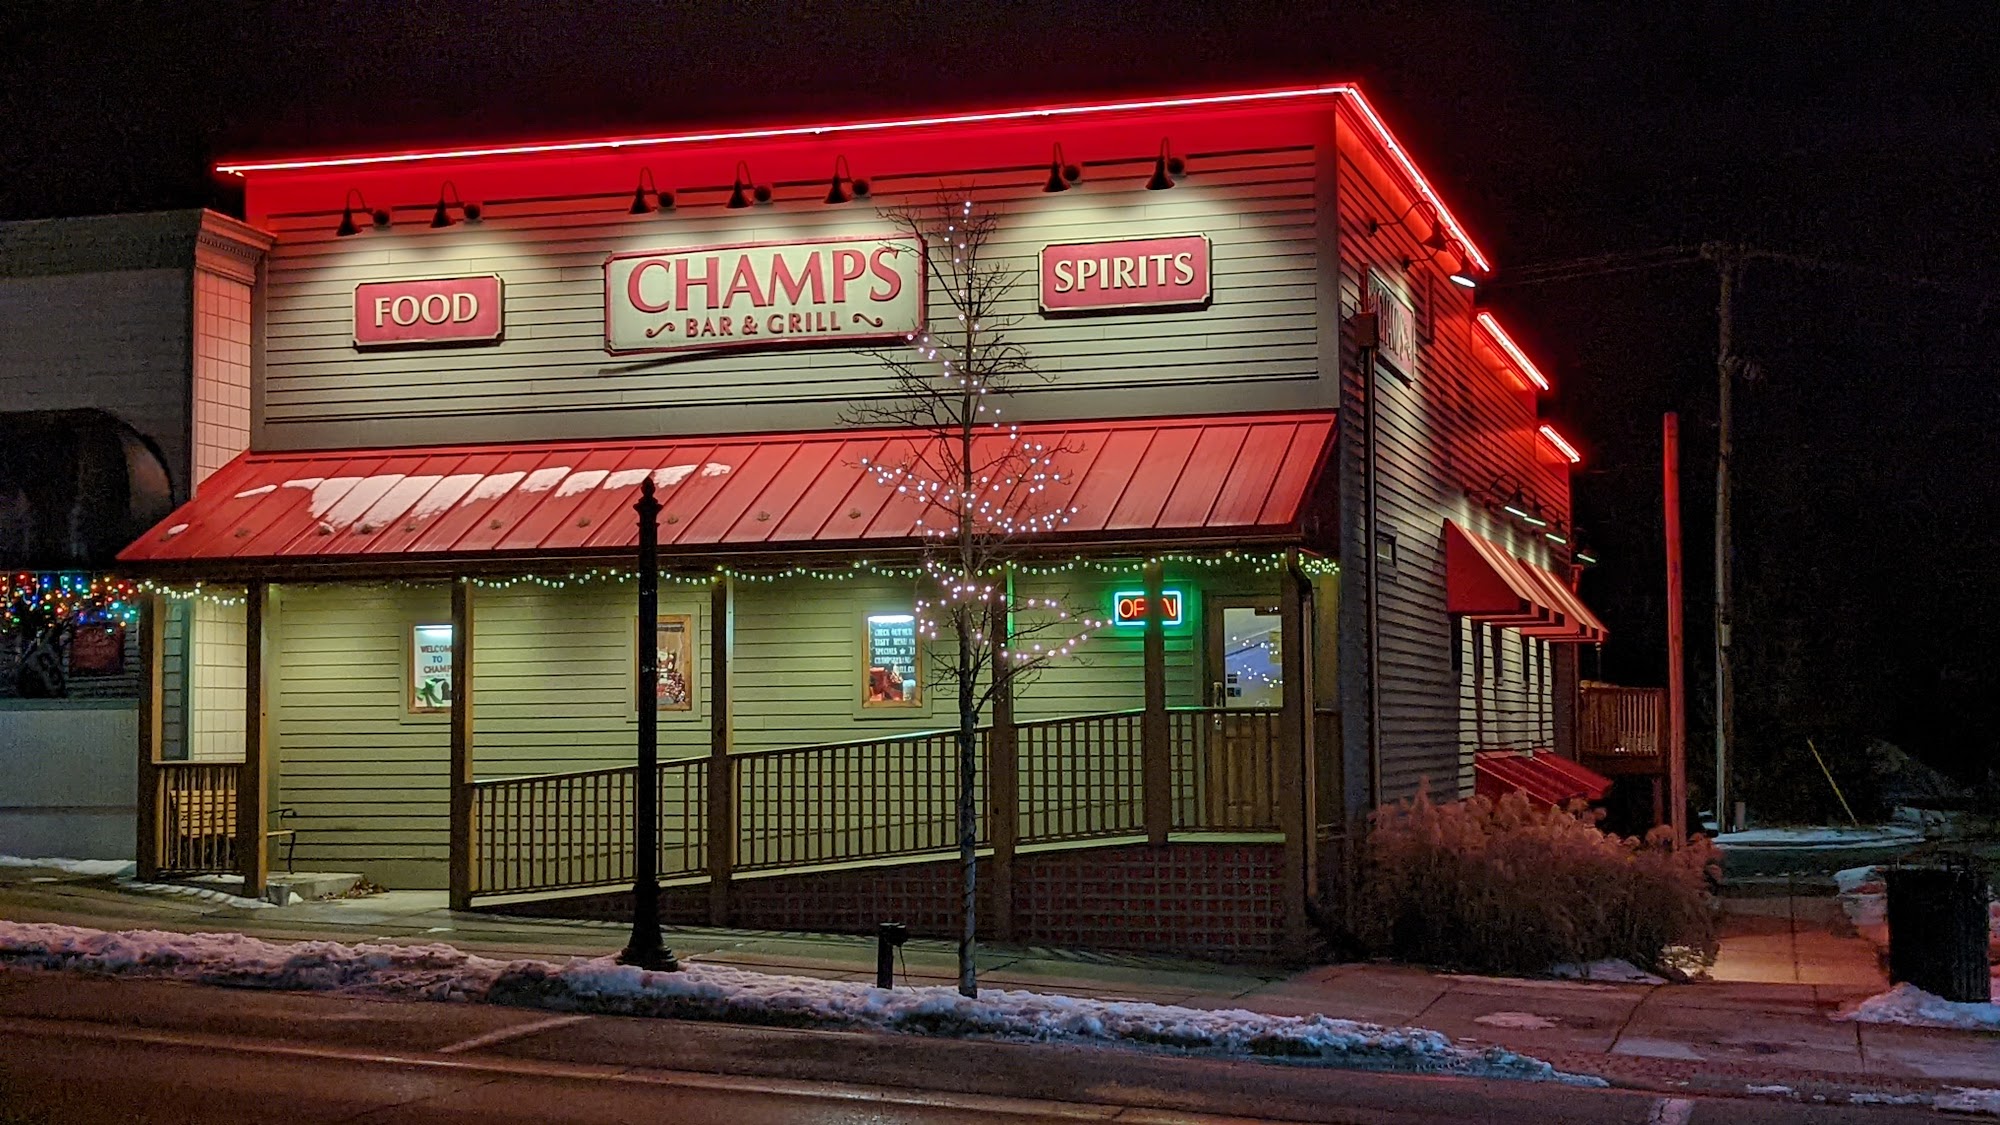 Champs Bar & Grill